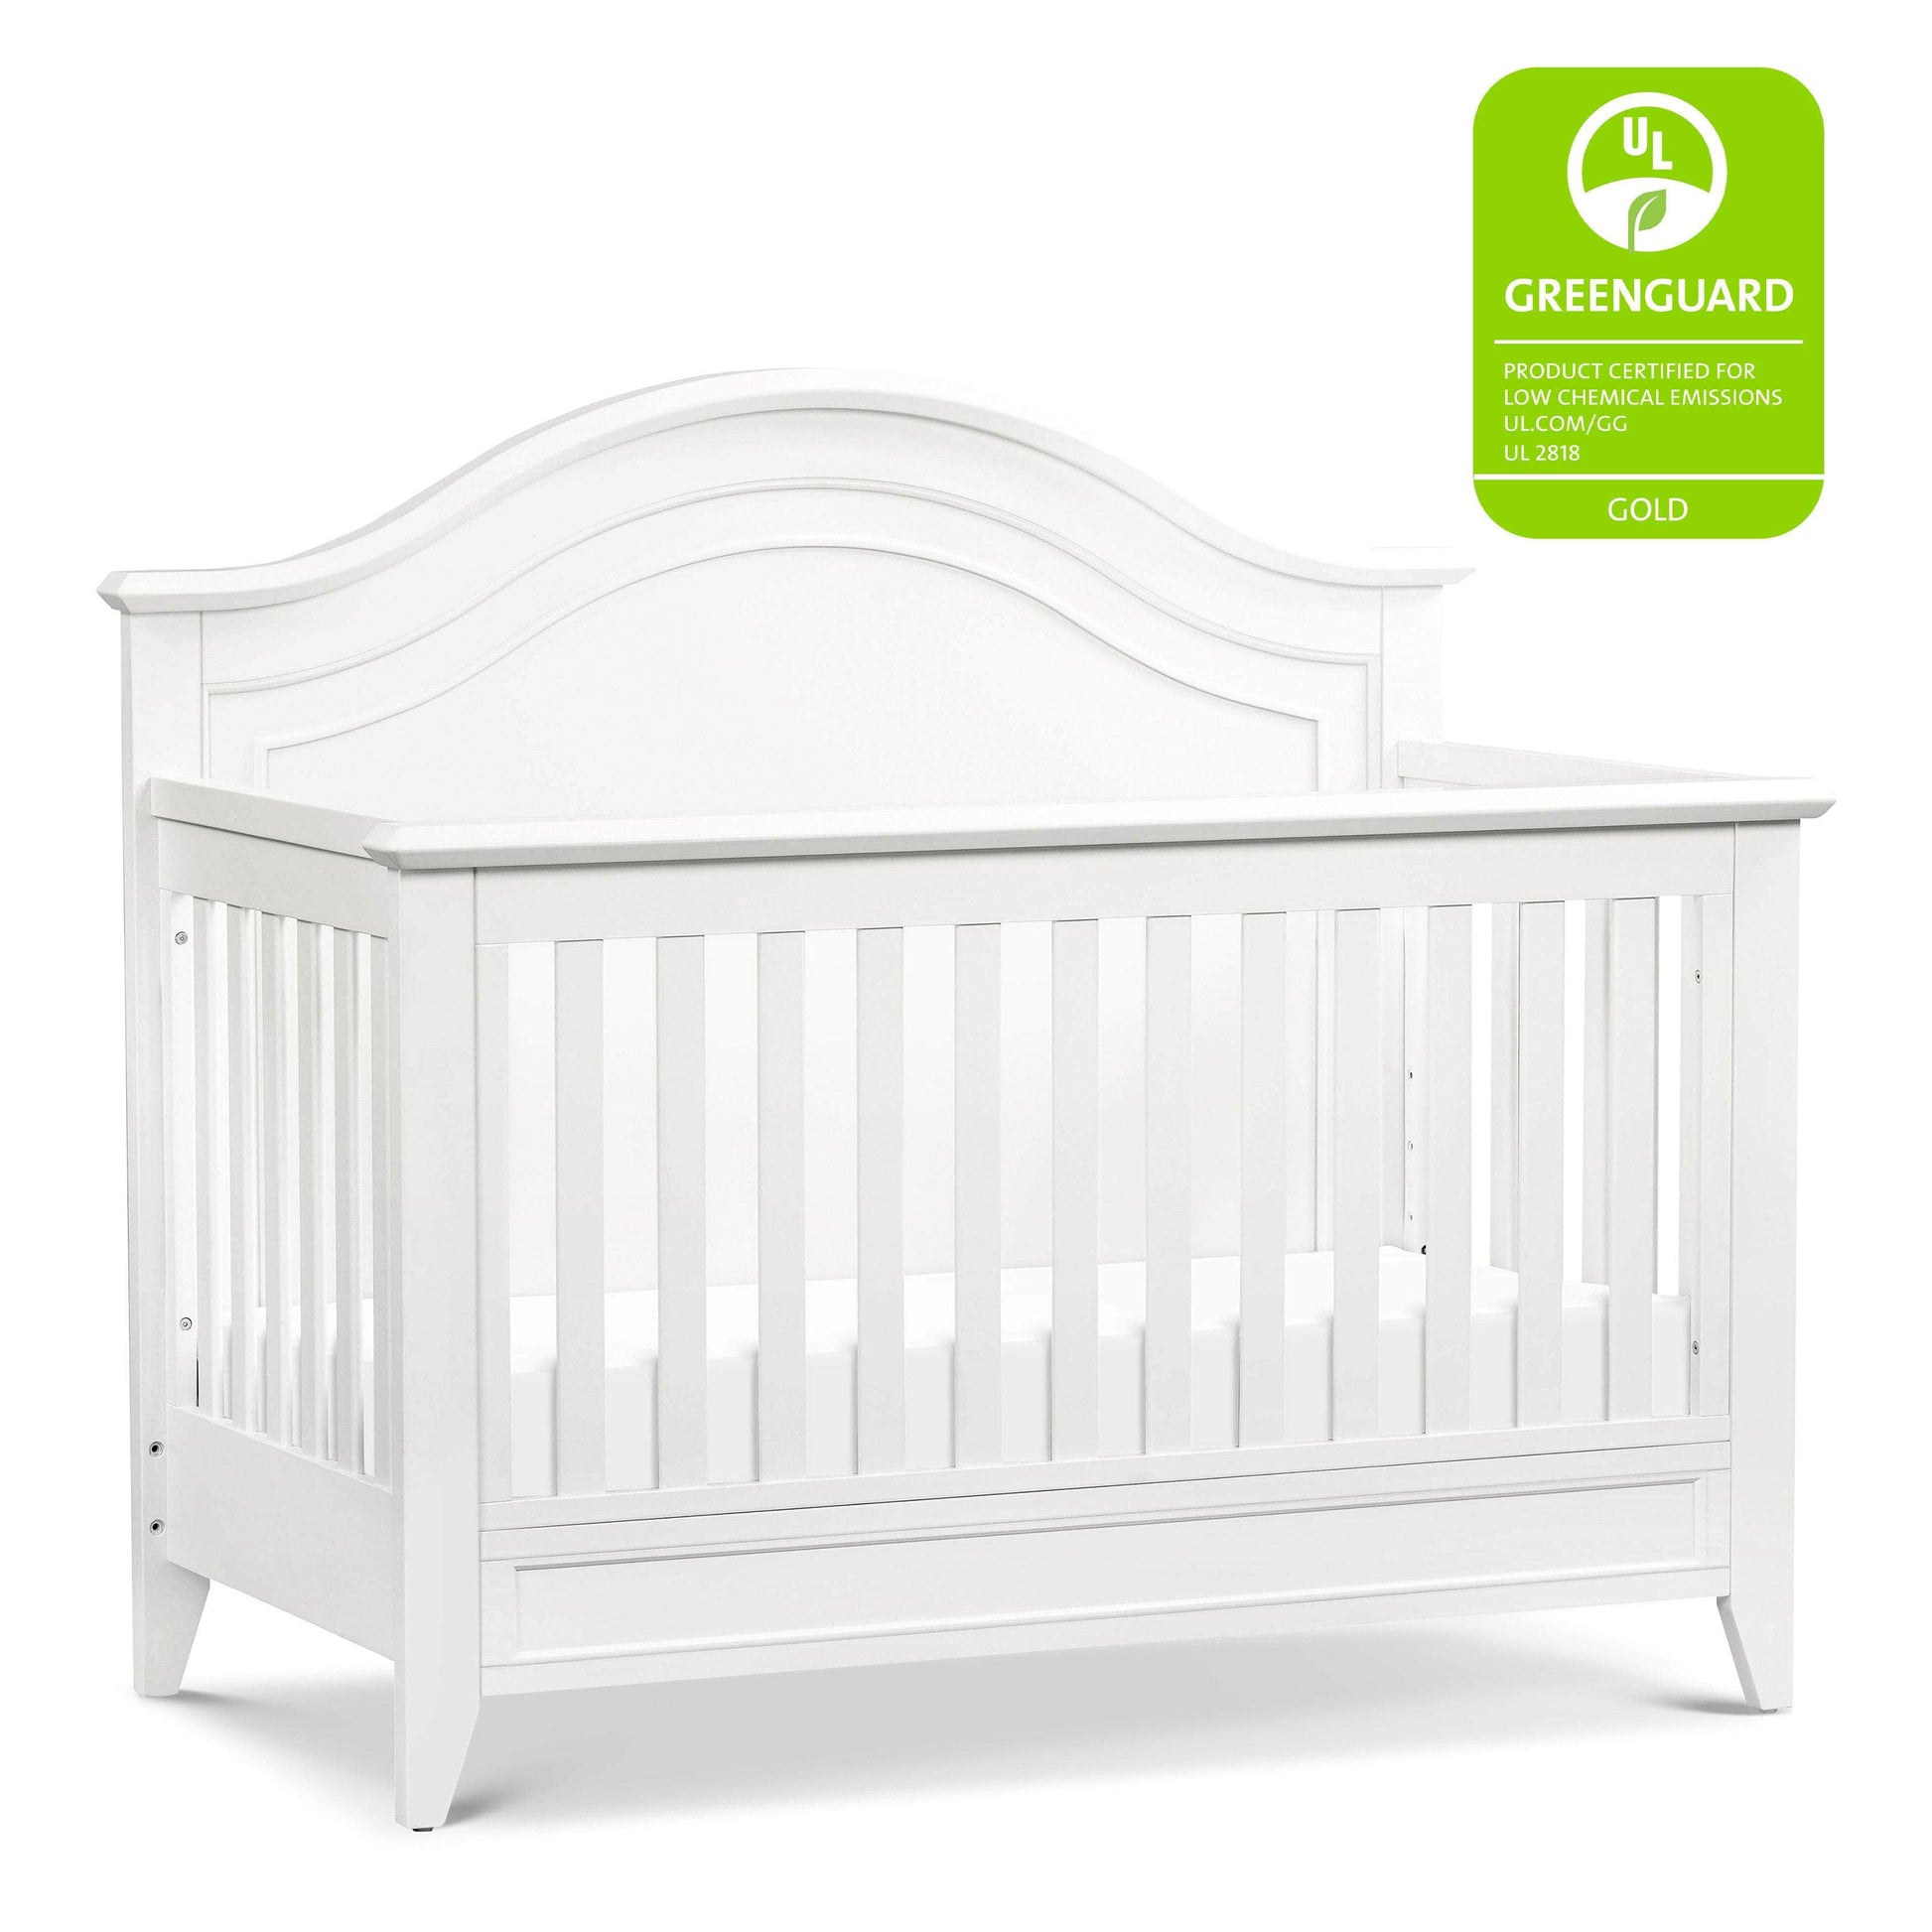 M34401RW,Beckett Rustic 4-in-1 Convertible Curve Top Crib in Warm White